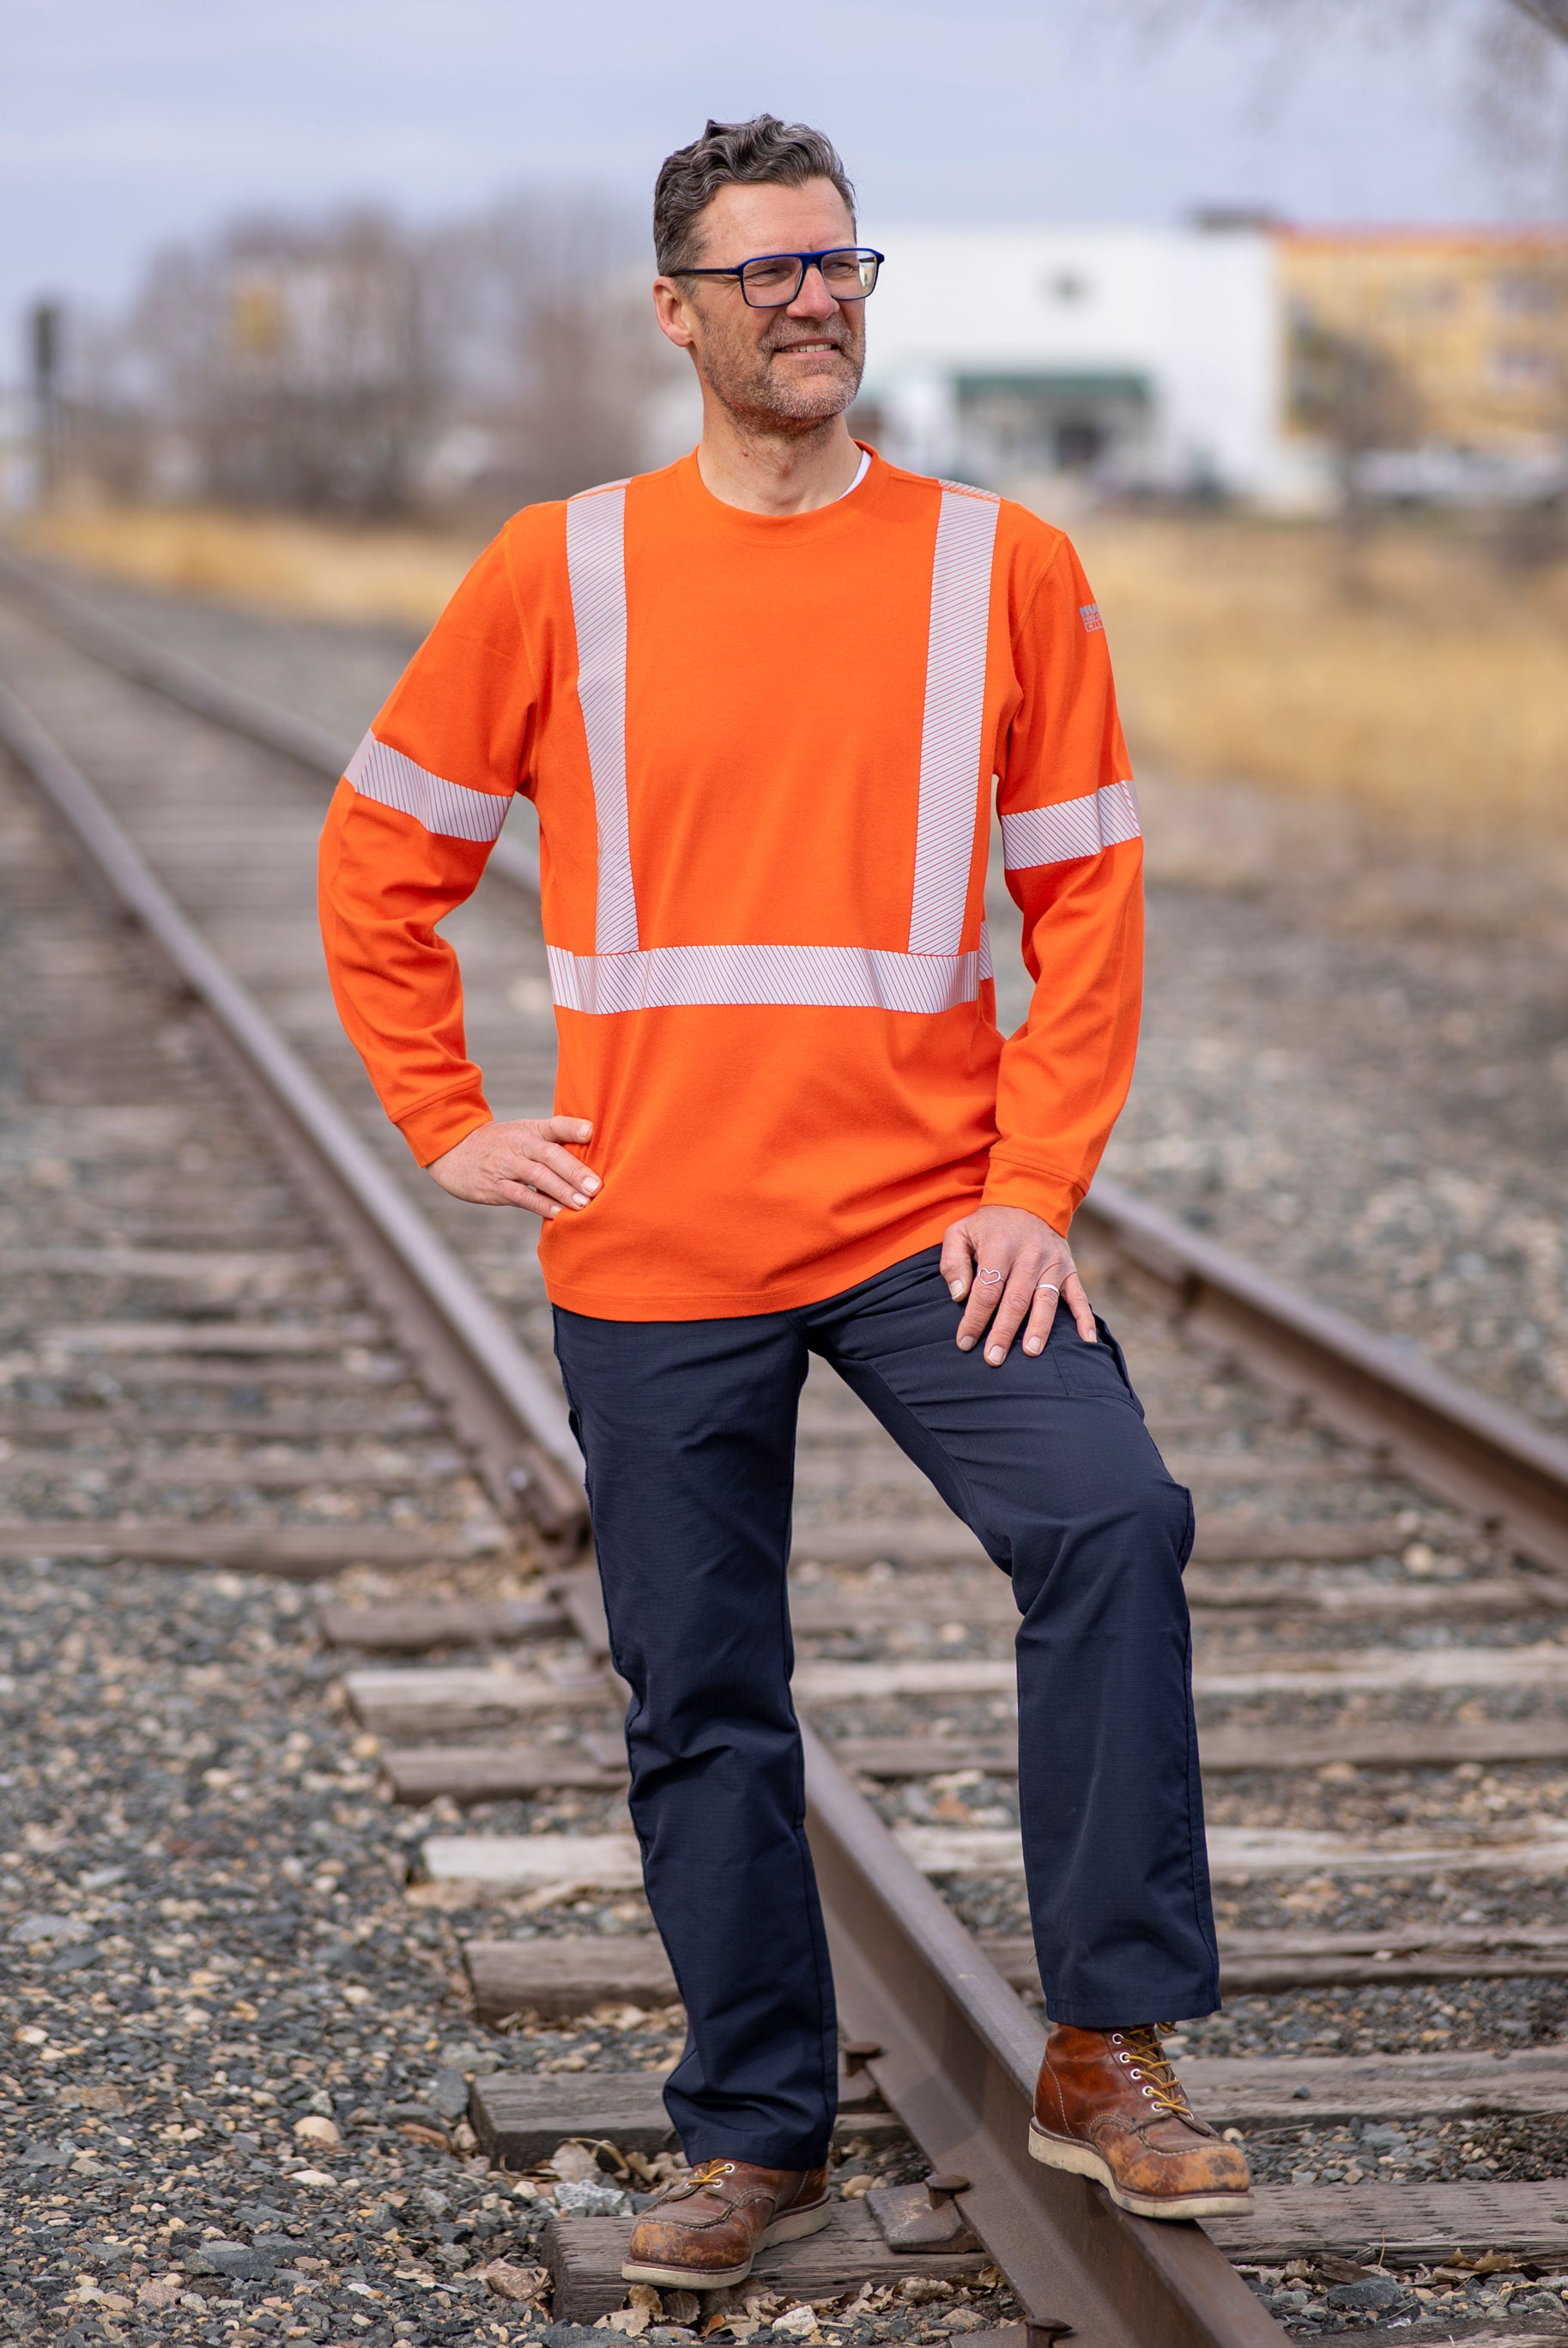 Image of MWG EVOLUTION FRC Long-Sleeve T-Shirt. MWG EVOLUTION FR Shirt is bright orange in colour with silver segmented reflective tape to meet CSA Z96-15. MWG EVOLUTION is a lightweight inherent flame-resistant (FR) fabric. Model is wearing a size Large MWG EVOLUTION FR Shirt with MWG RIPGUARD FR utility pants.